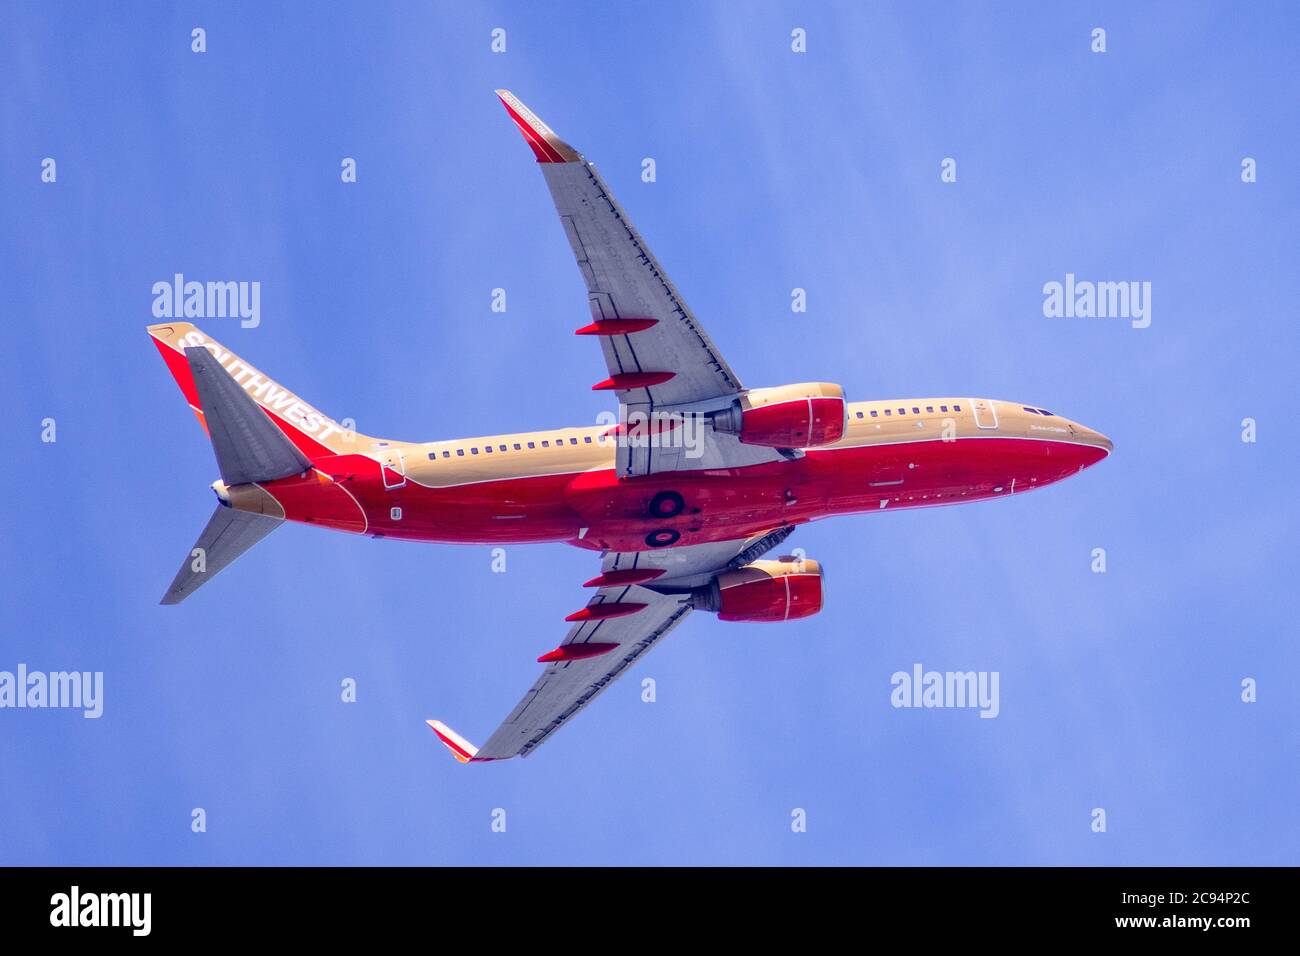 July 21, 2020 San Jose / CA / USA - Southwest Airlines plane with Classic Livery (a slightly modified version of the airline's original livery) taking Stock Photo